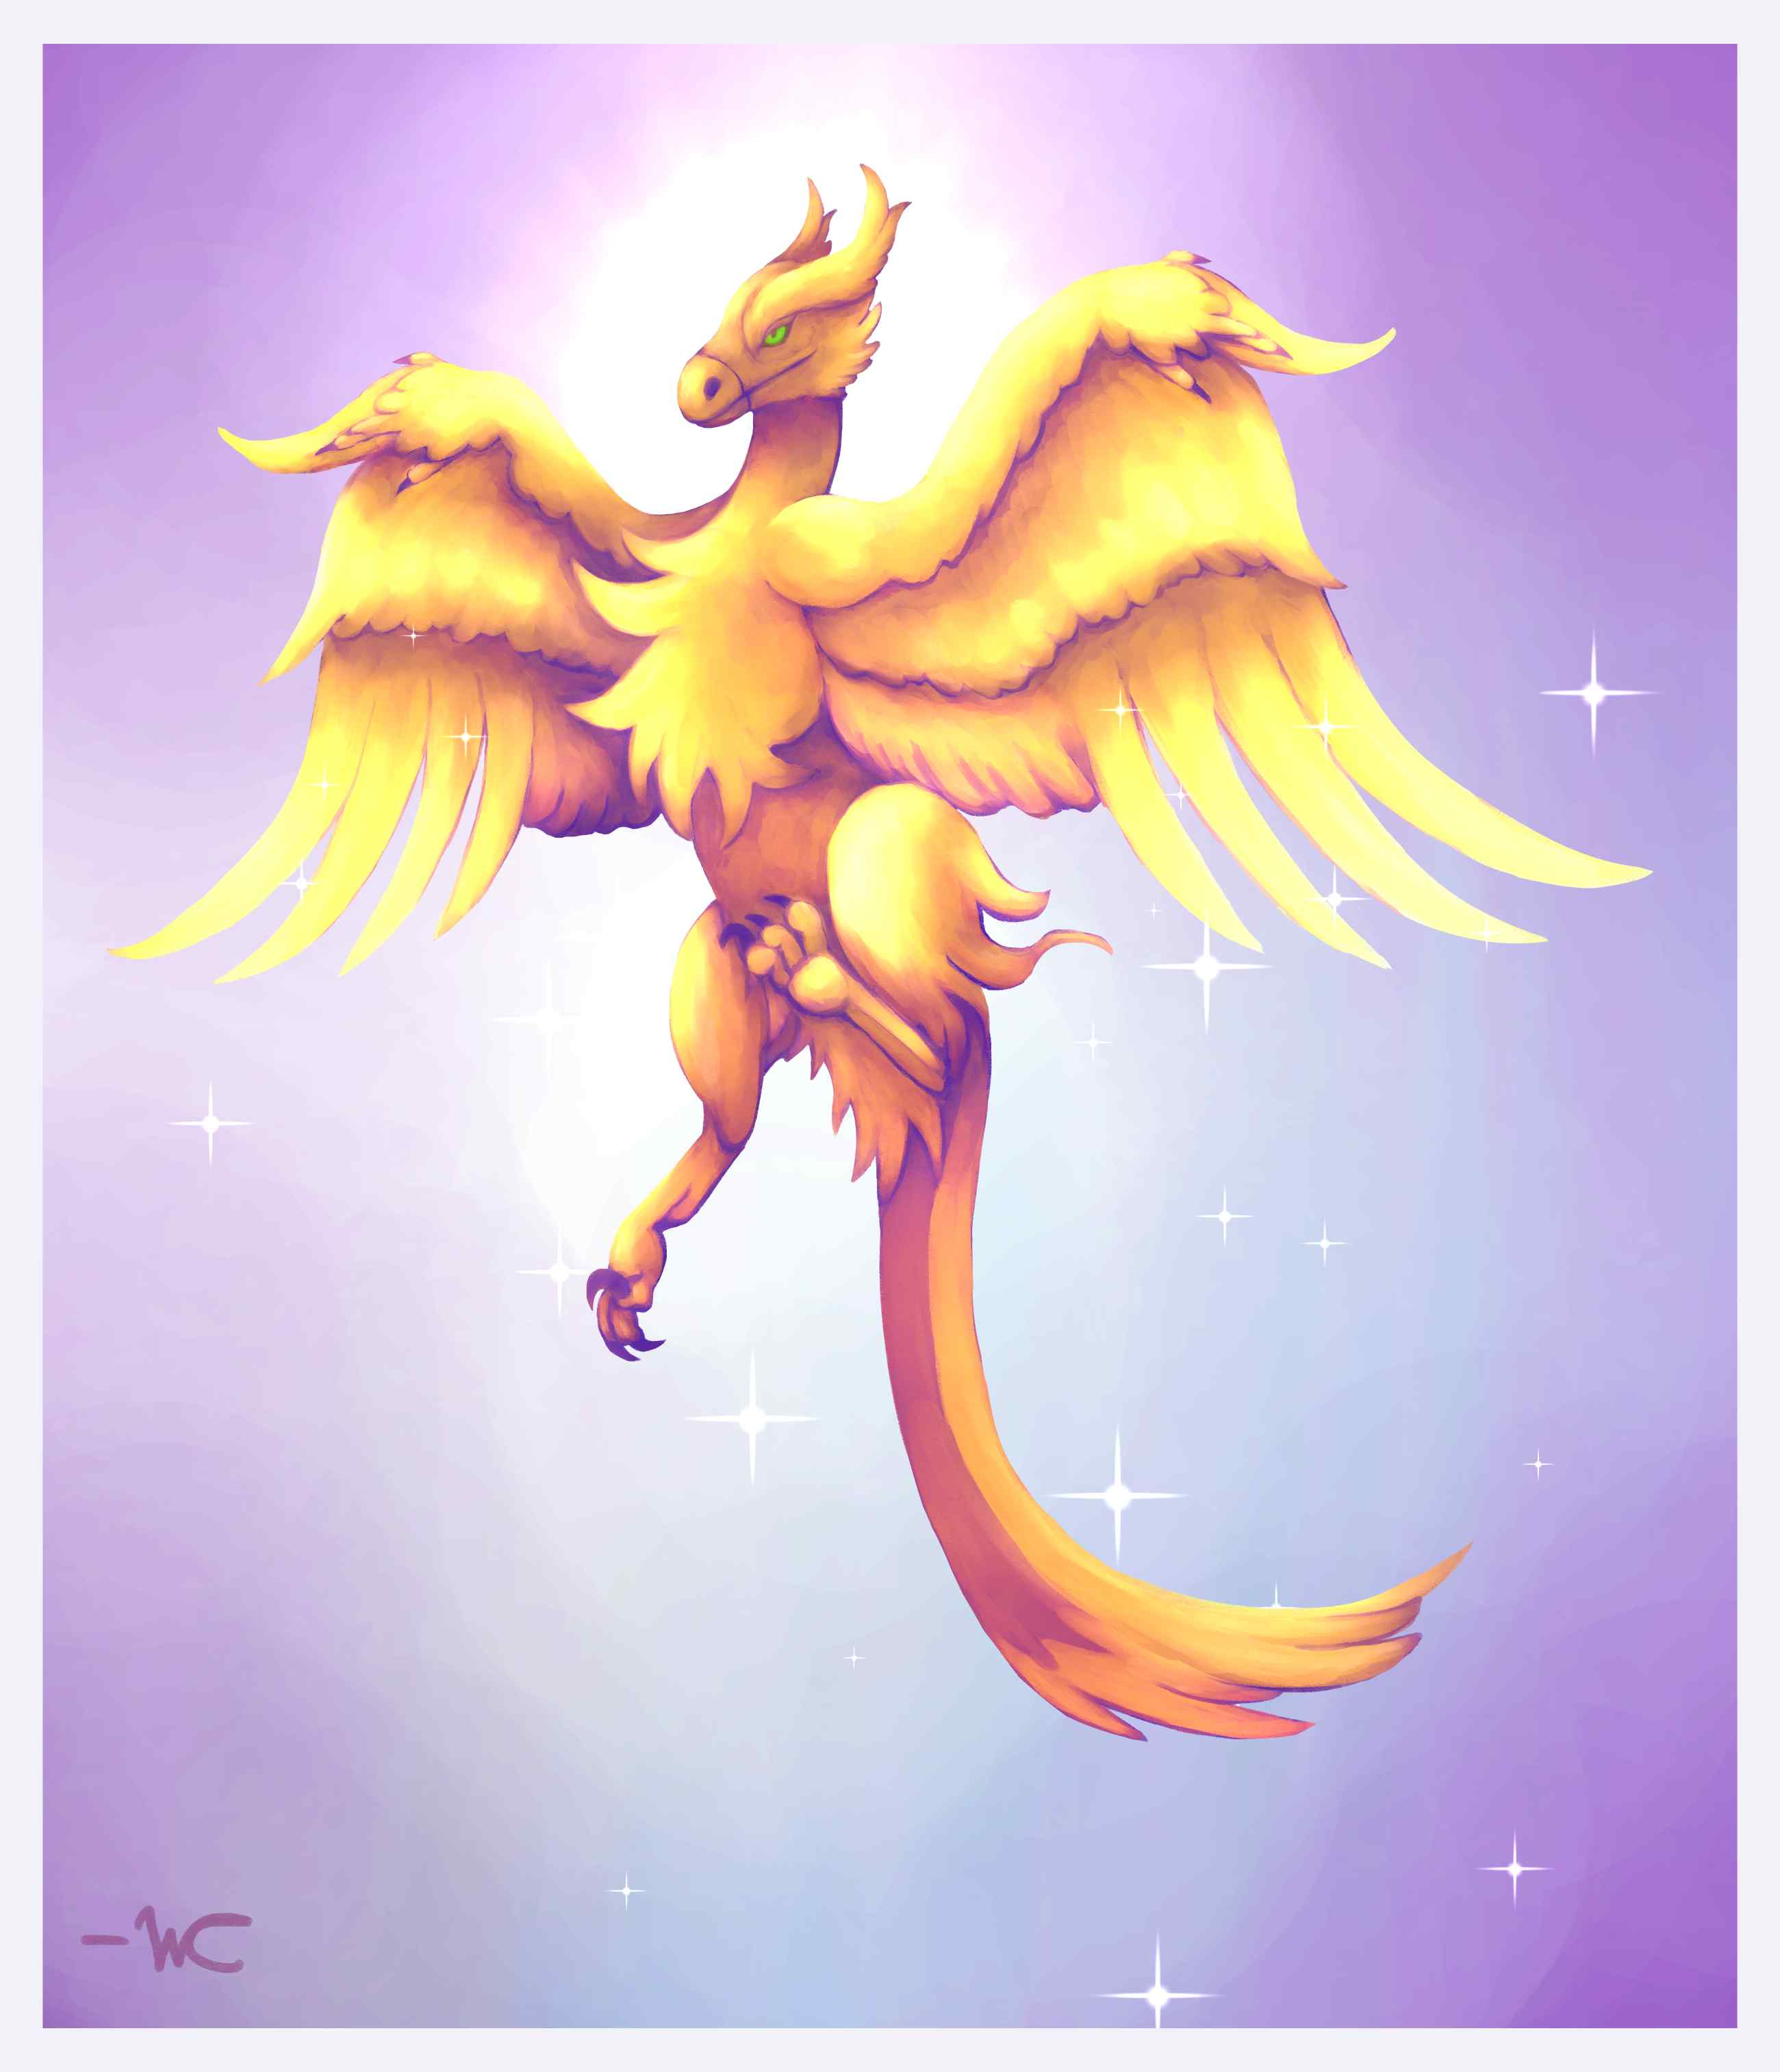 A golden dromaeosaur against a pale purple background. The raptor has feathers. Its winged arms are spread open. It's as if it is flying. Its long tail is trailing beneath it. White sparkles are falling from its wings. There is light coming from behind its head. 